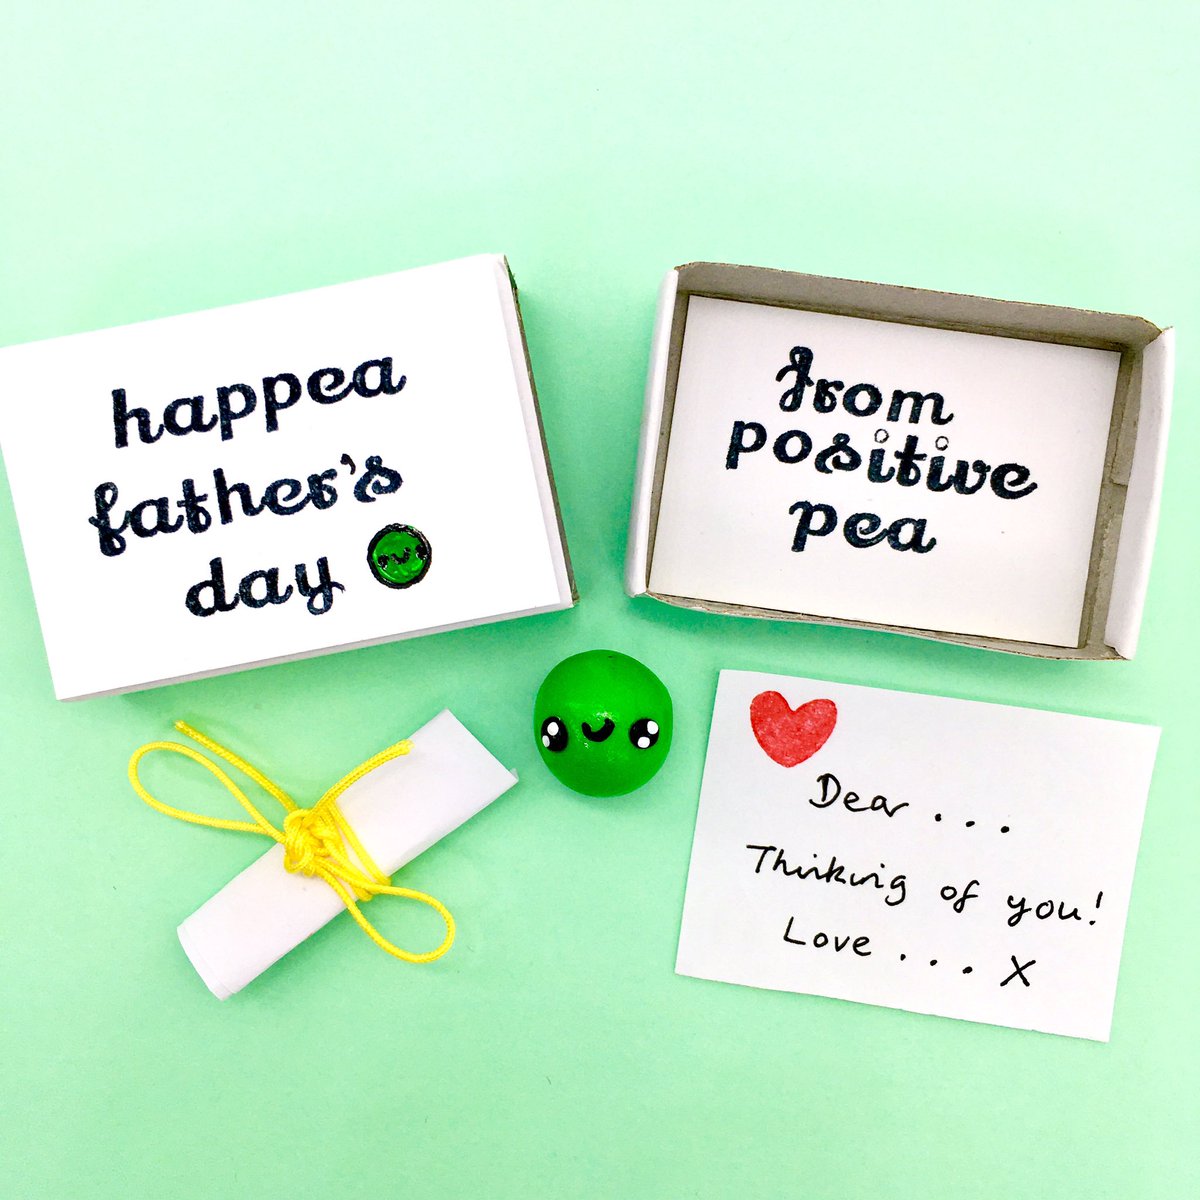 Morning #elevenseshour ! I’m sharing a fun little matchbox gift for #FathersDay , with this tiny, cute #positivity pea! x 💚

#wednesdaythought #cutegift #handmadegifts #etsy #shopindie 

etsy.com/shop/janeBprin…